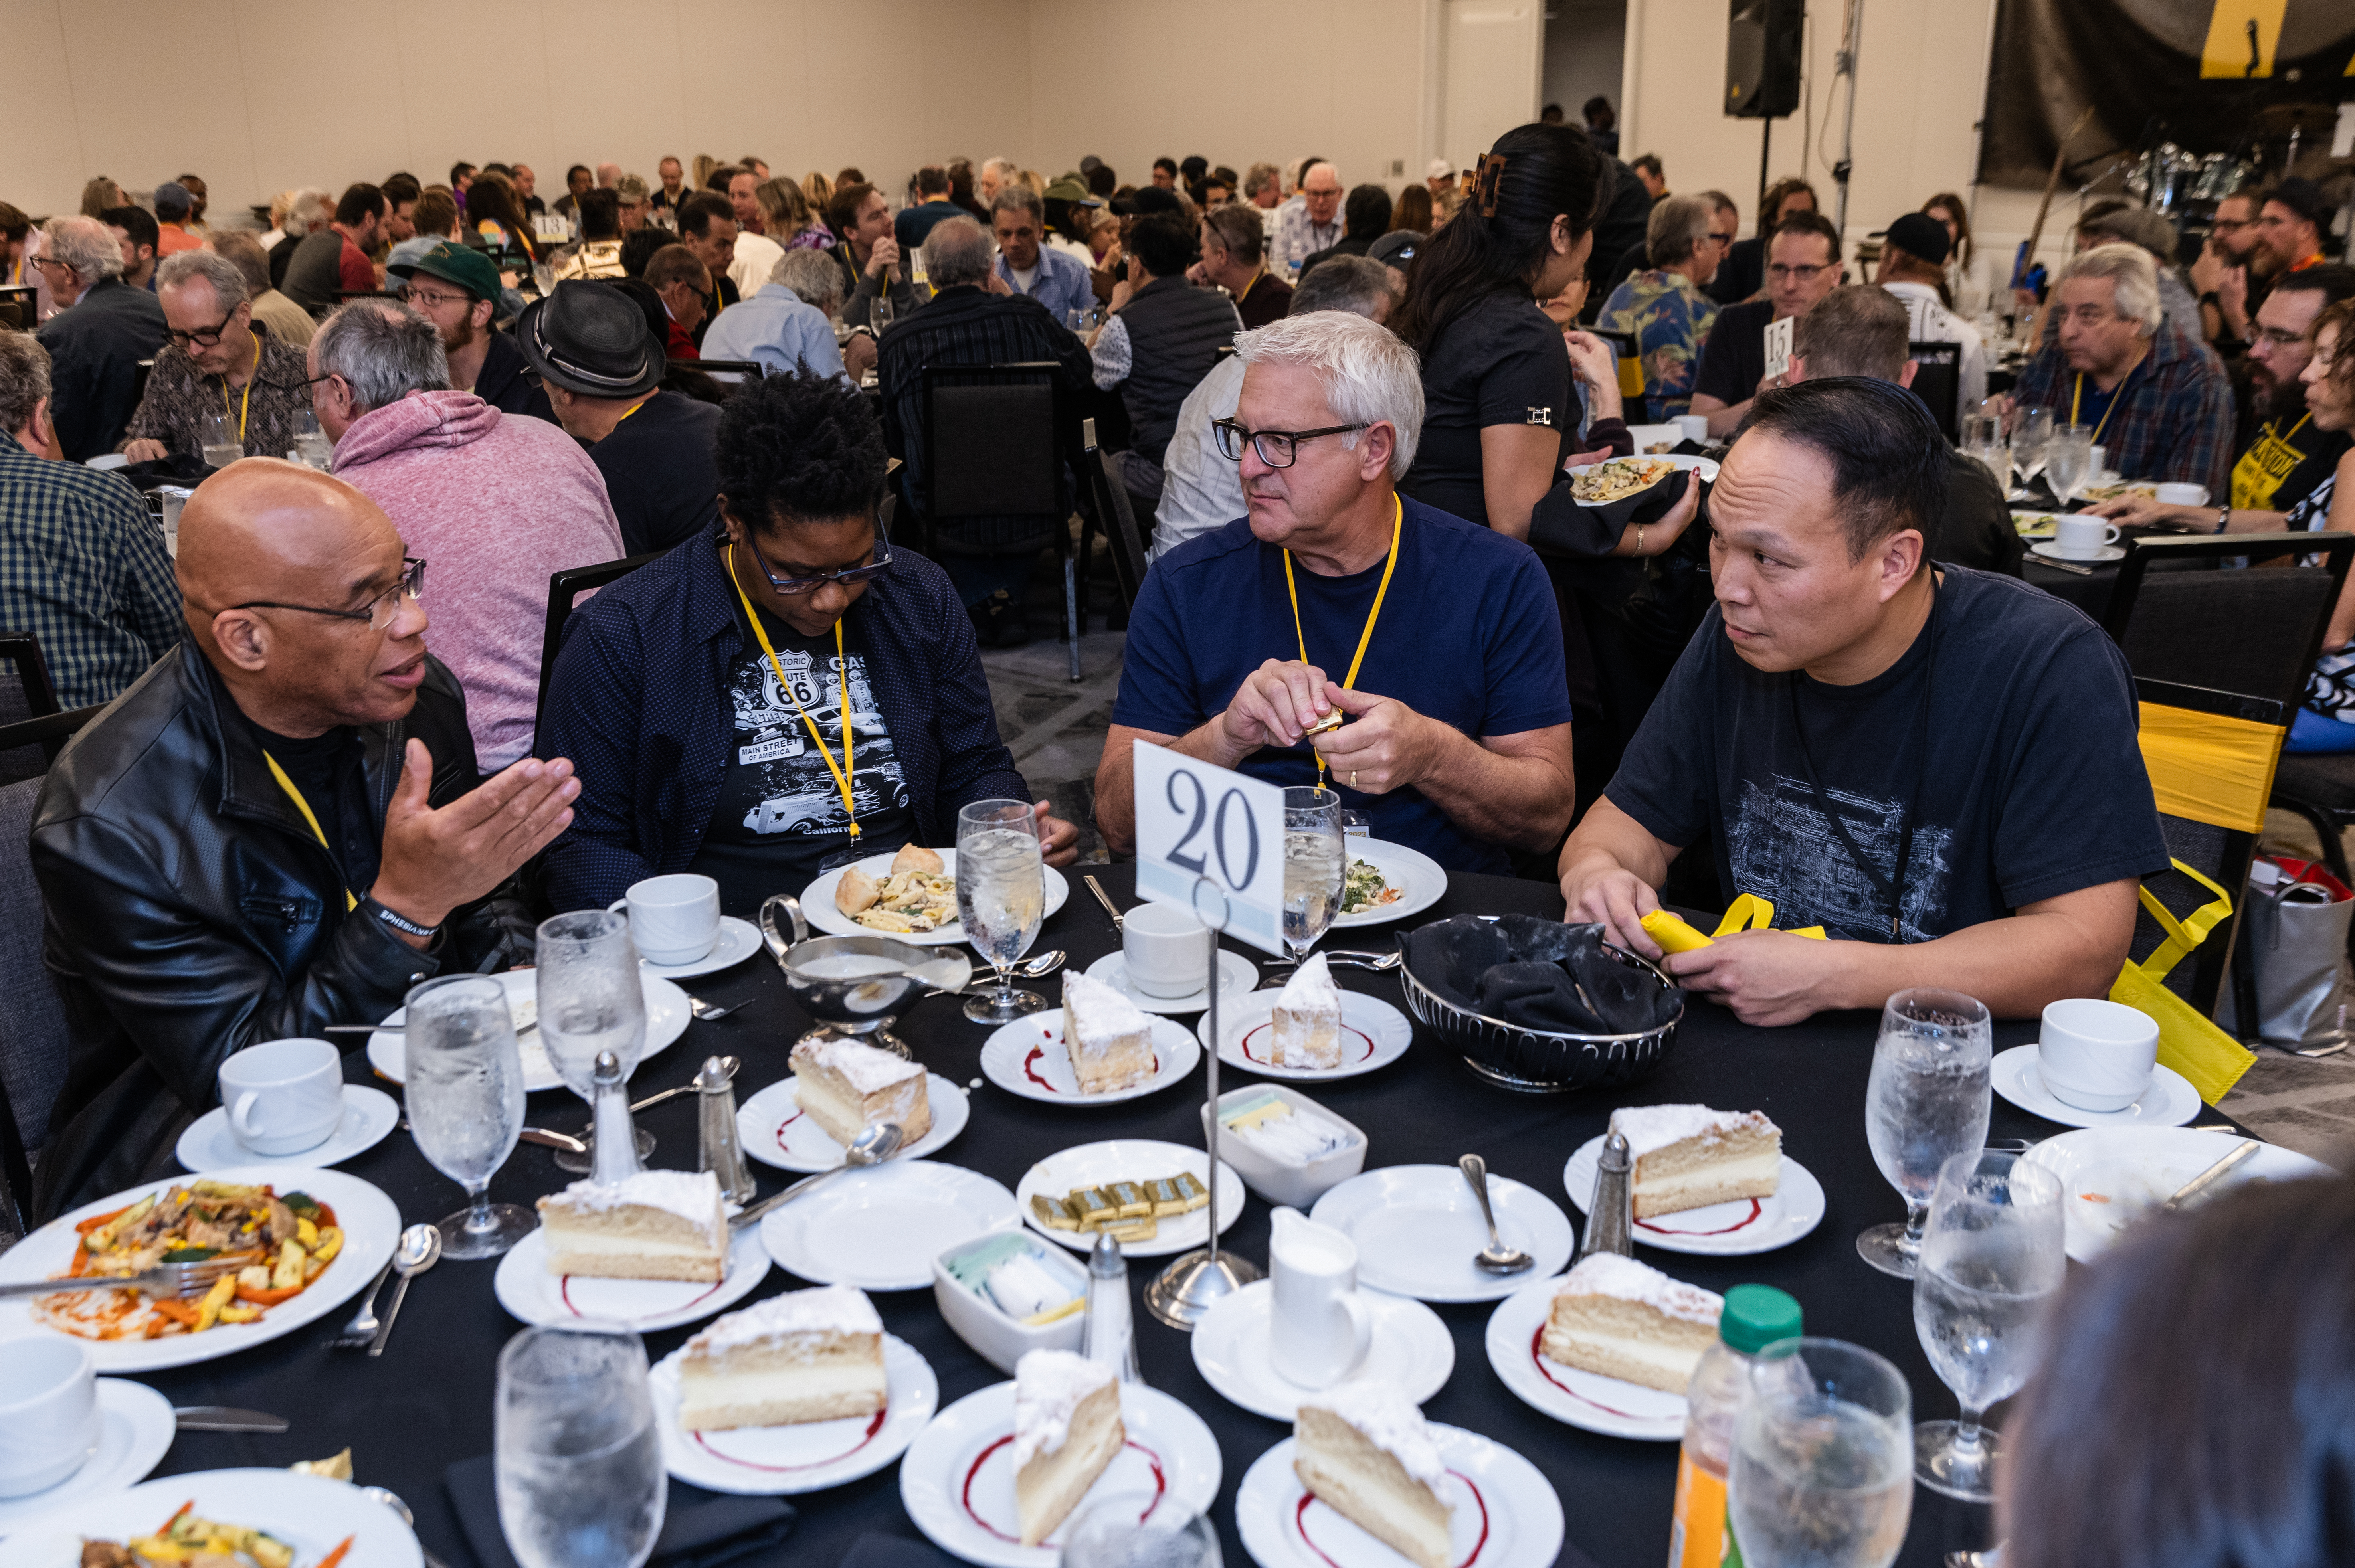 Mentor, Owen Chaim (far right) discussing something really important because nobody has touched their dessert yet during this Eat & Greet Luncheon.